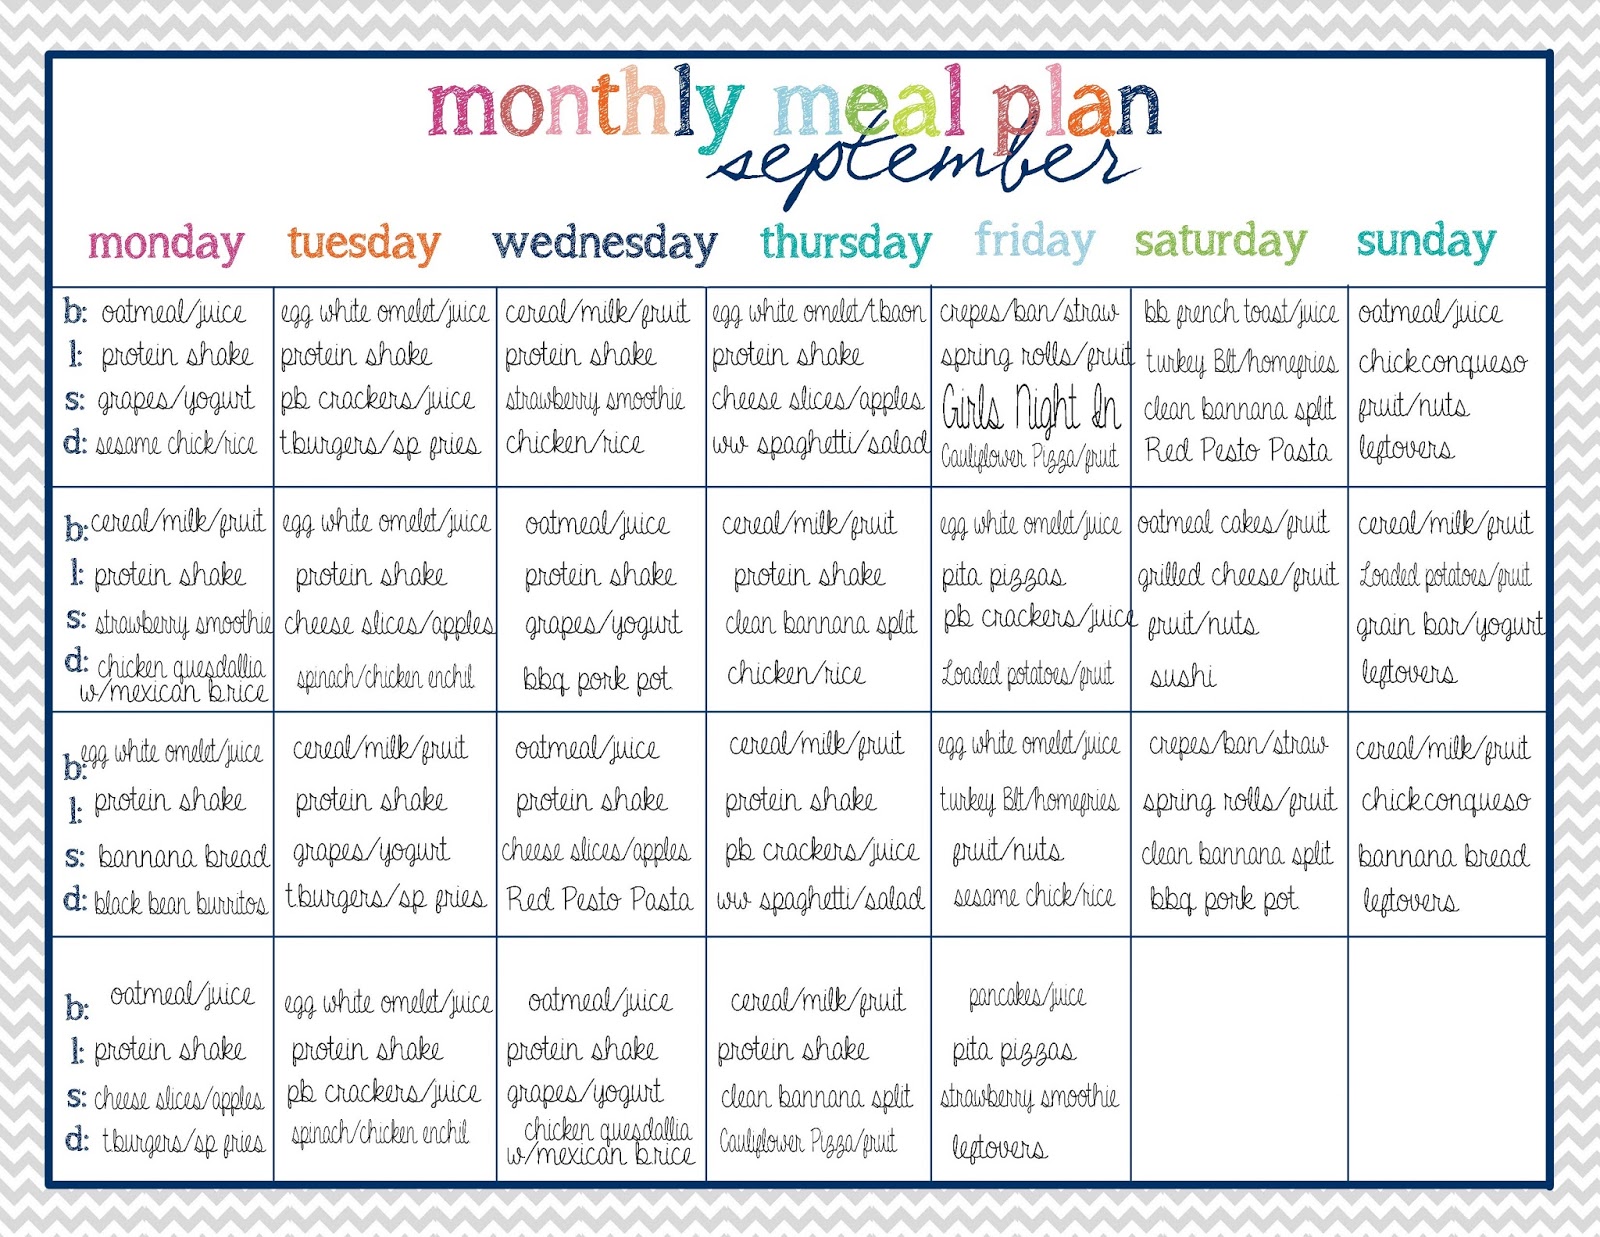 6 month meal plan to lose weight